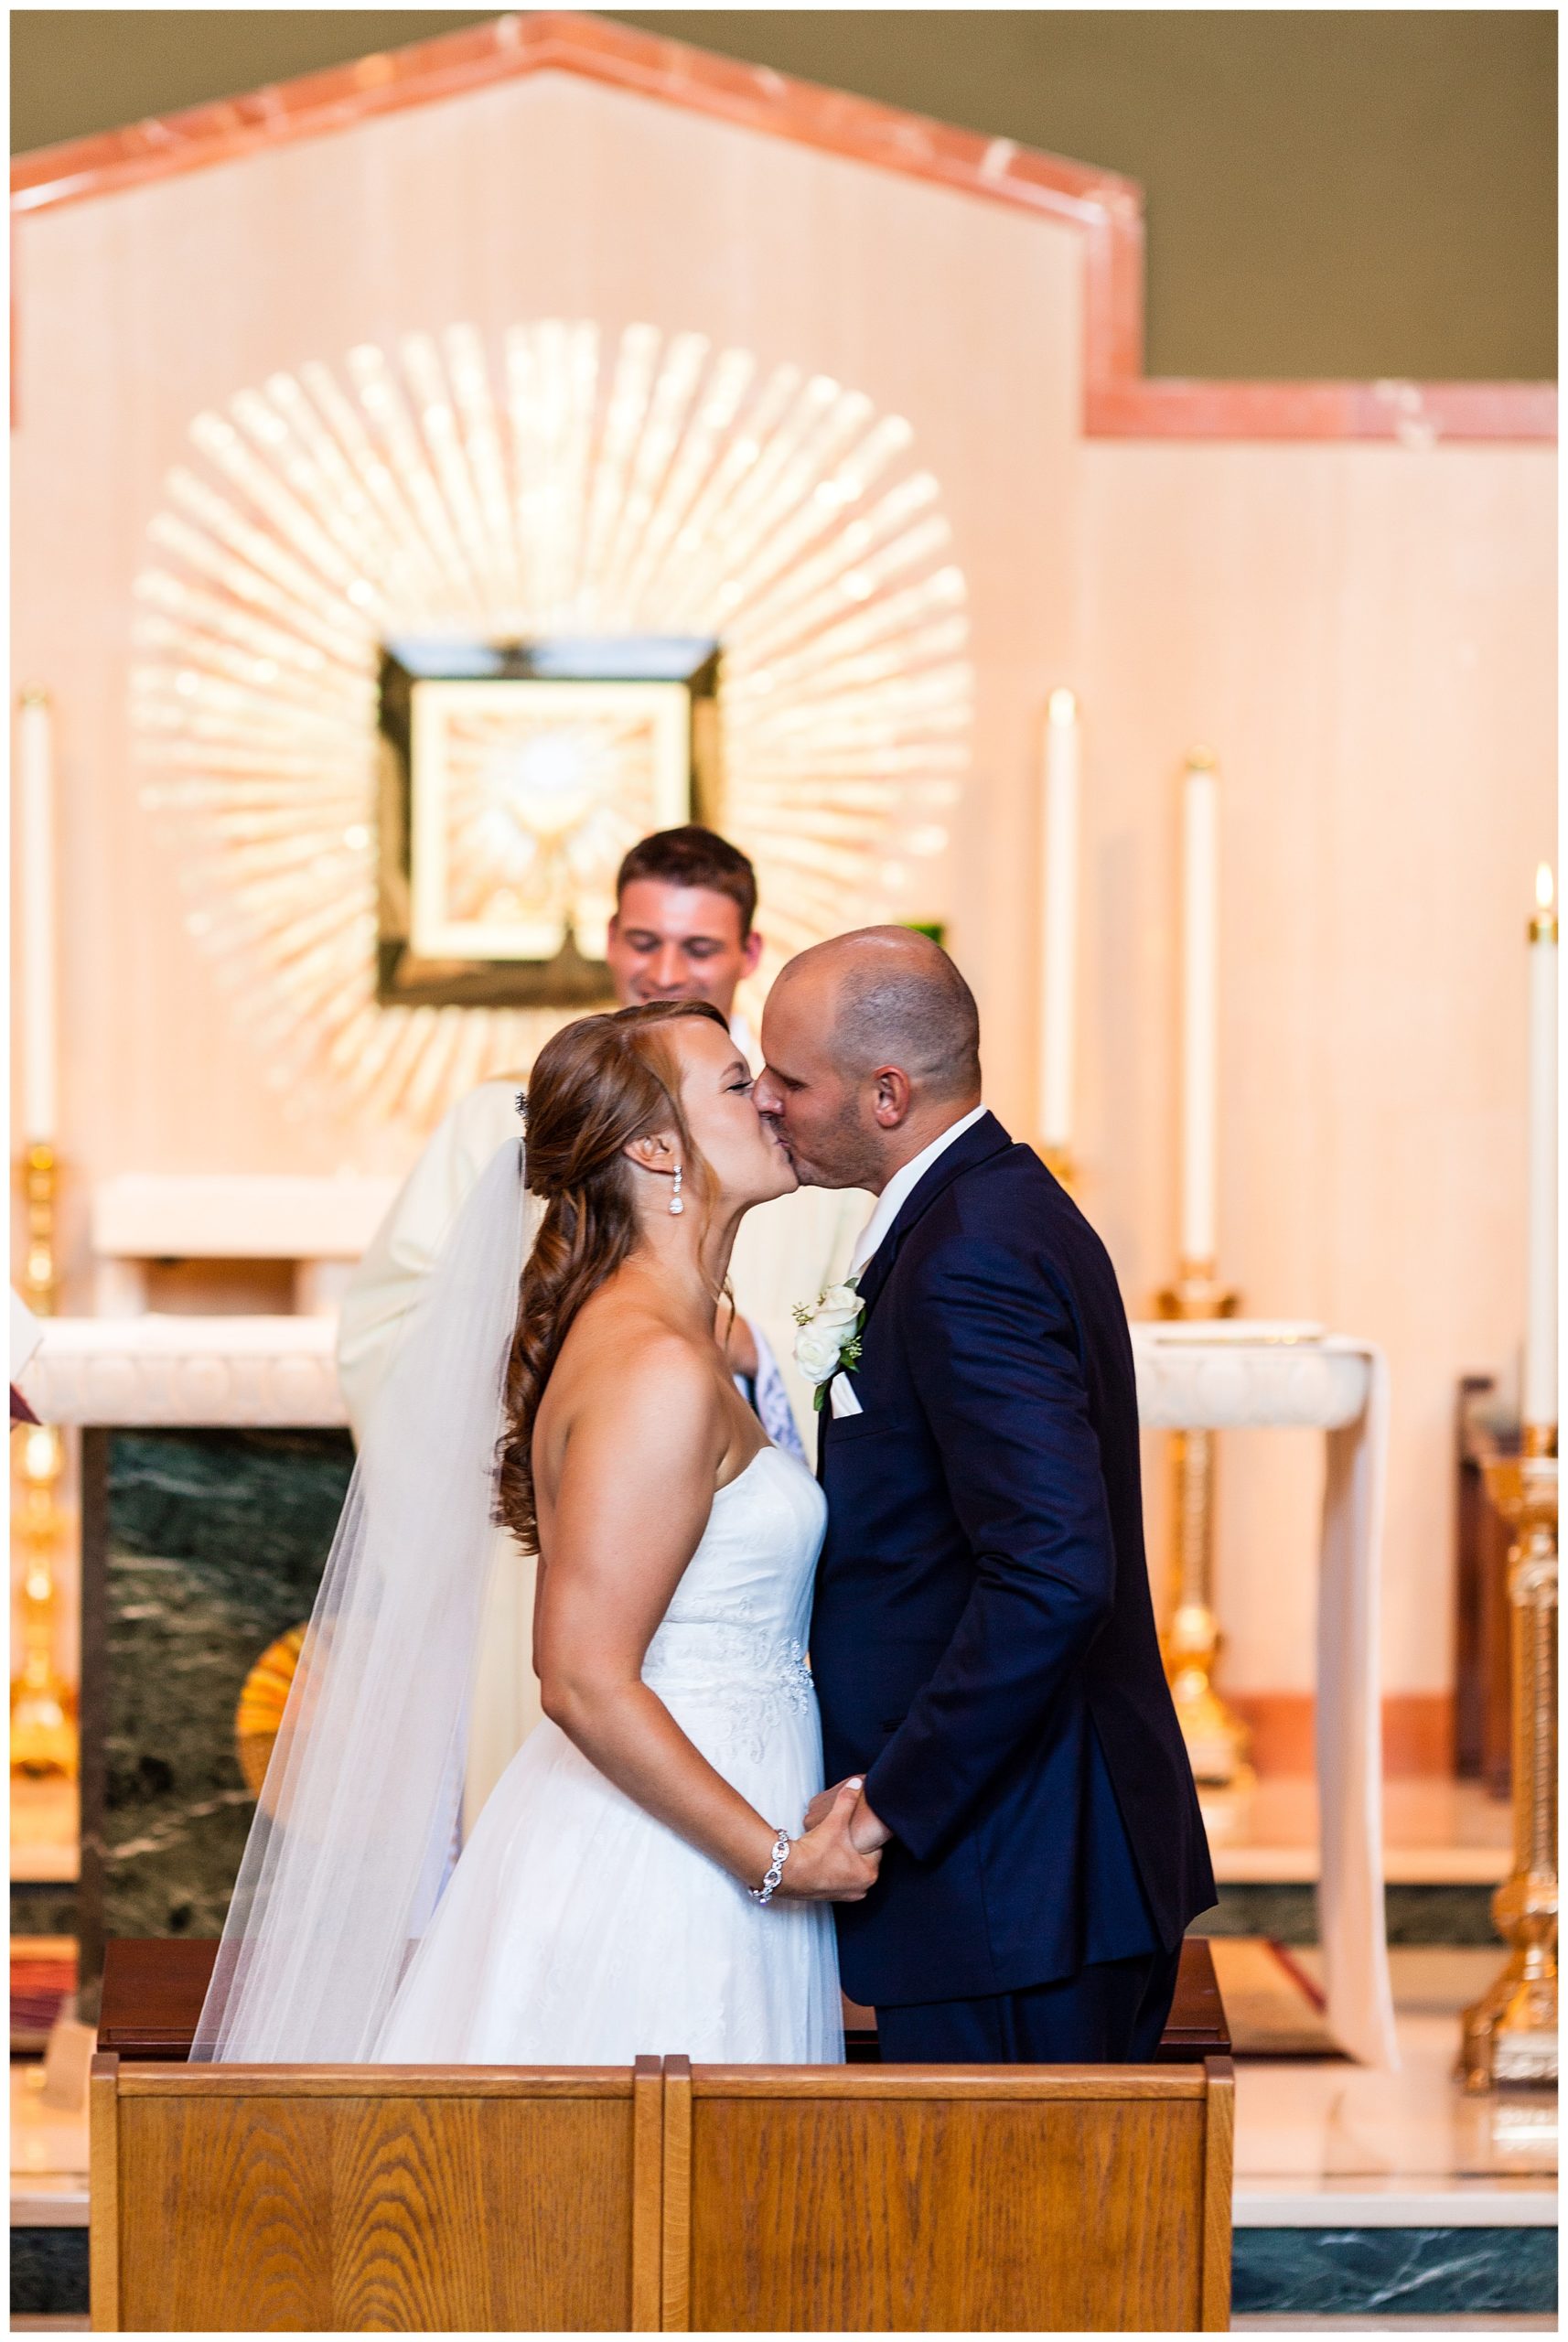 Bride and groom kiss at alter in St. Andrew's Church wedding ceremony